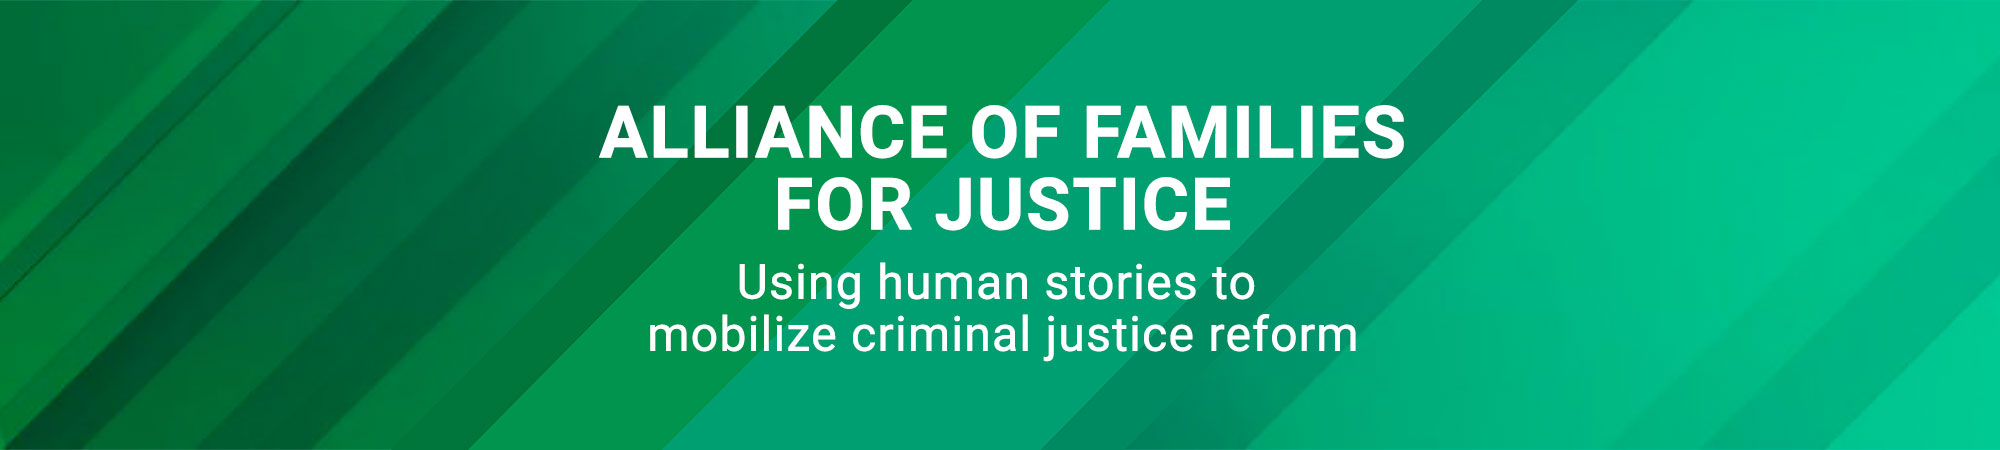 Alliance of Families For Justice Banner in green